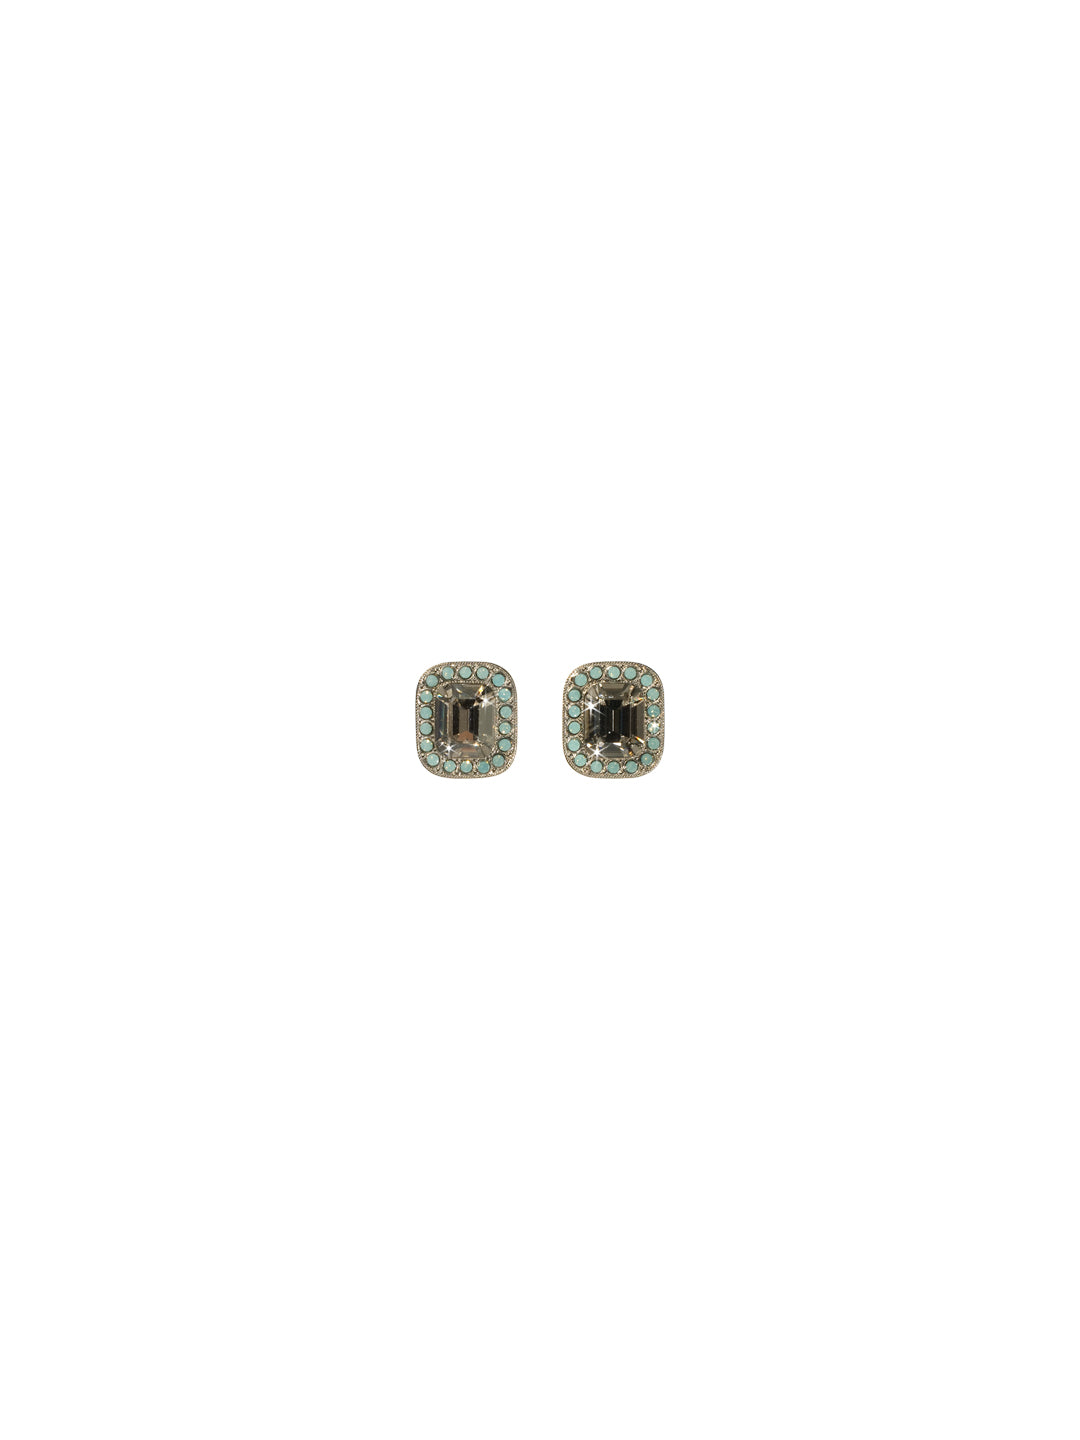 Lovely Luxury Stud Earrings - ECL10ASAES - Sparkle and shine in this piece no matter what you're doing! Casual or dressy, it will being a pop of color and excitement to any occasion.